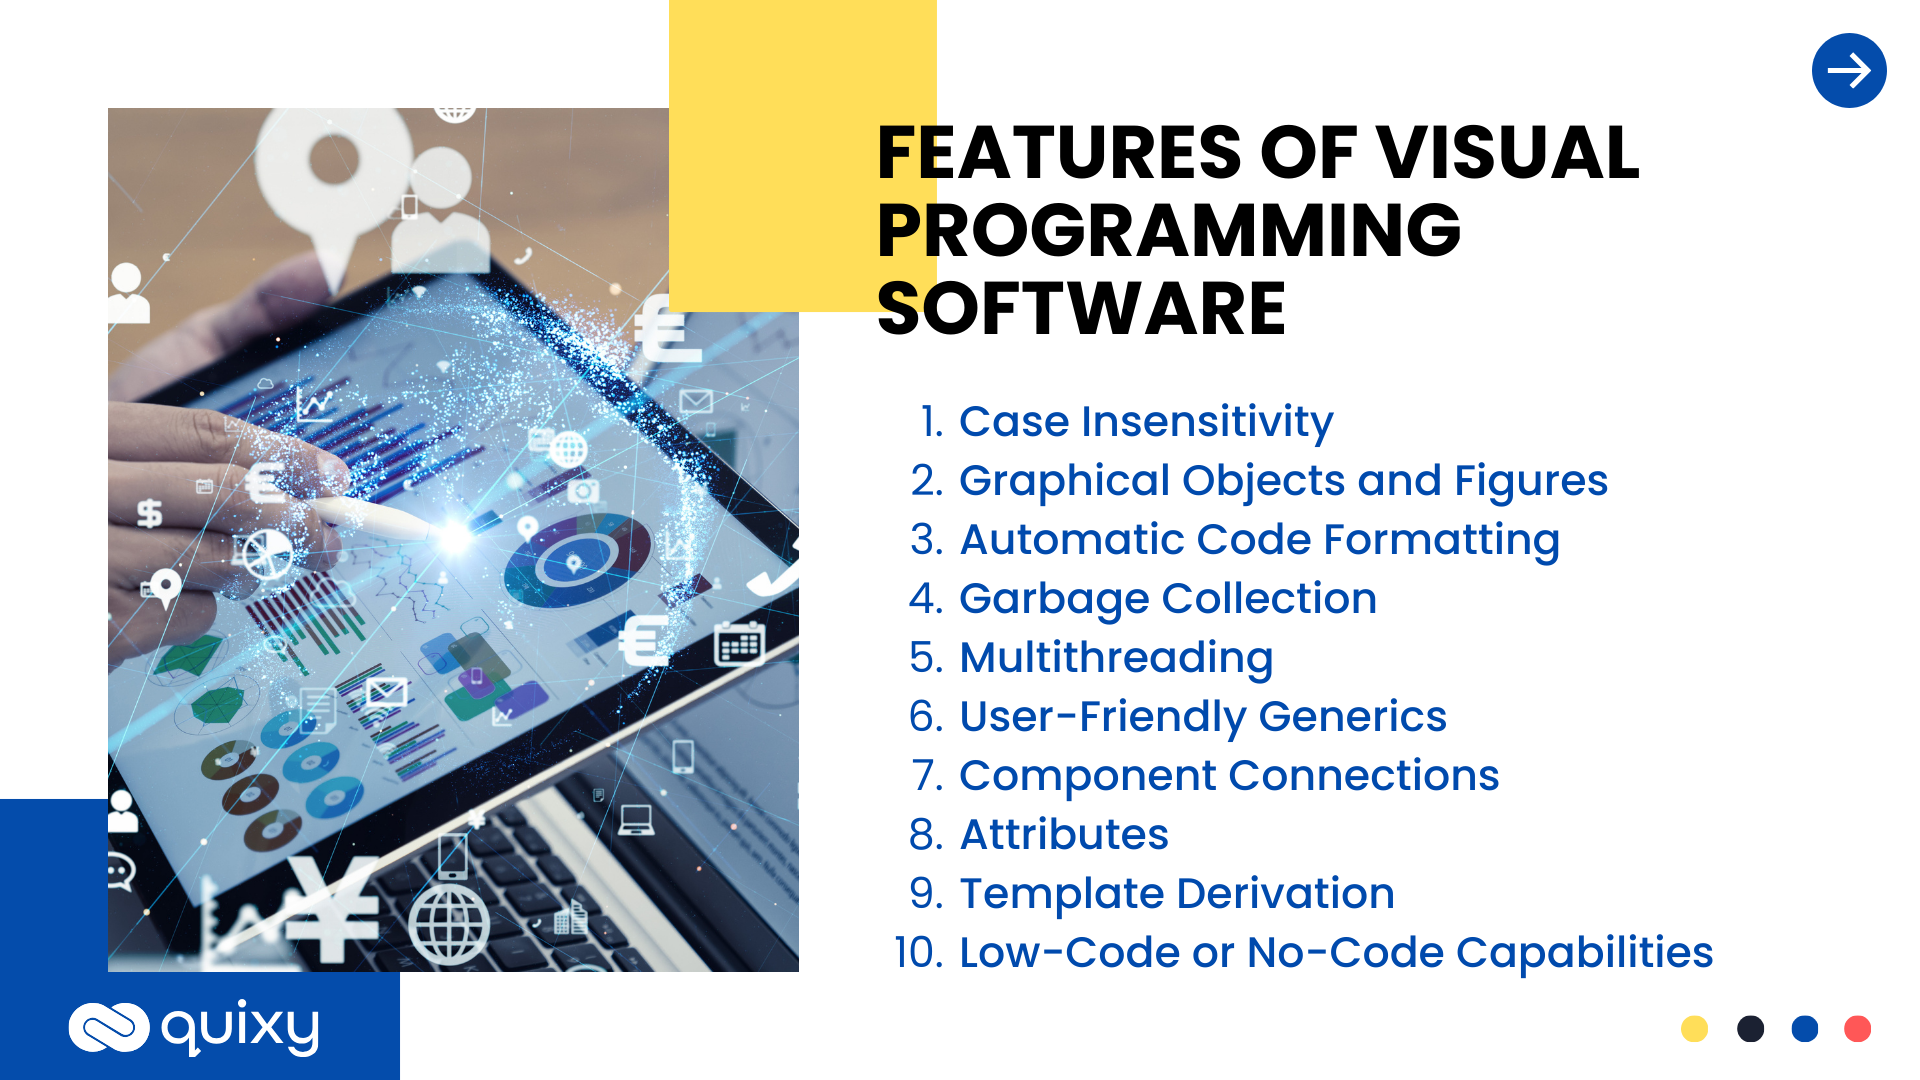 Features of Visual Programming Software